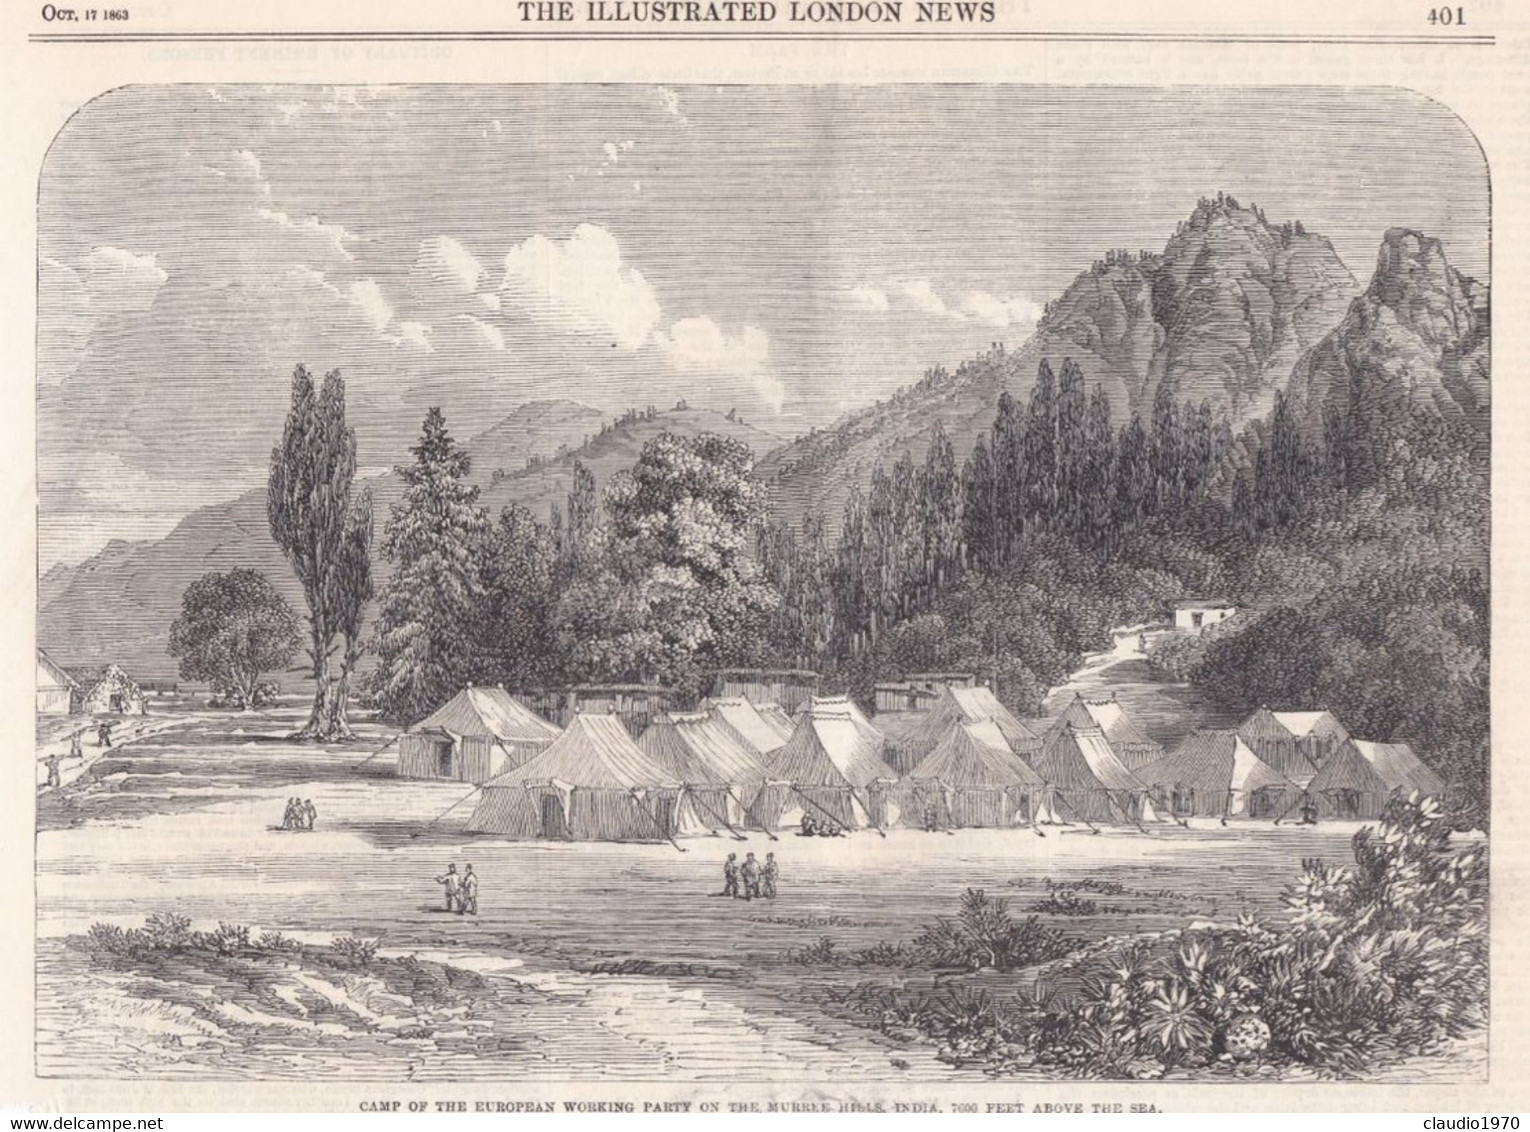 THE ILLUSTRATED LONDON NEWS  - RITAGLIO - STAMPA -CAMP OF EUROPEAN WORKING PARTY ON THE MURREE HELLES INDIA 700 - Non Classificati